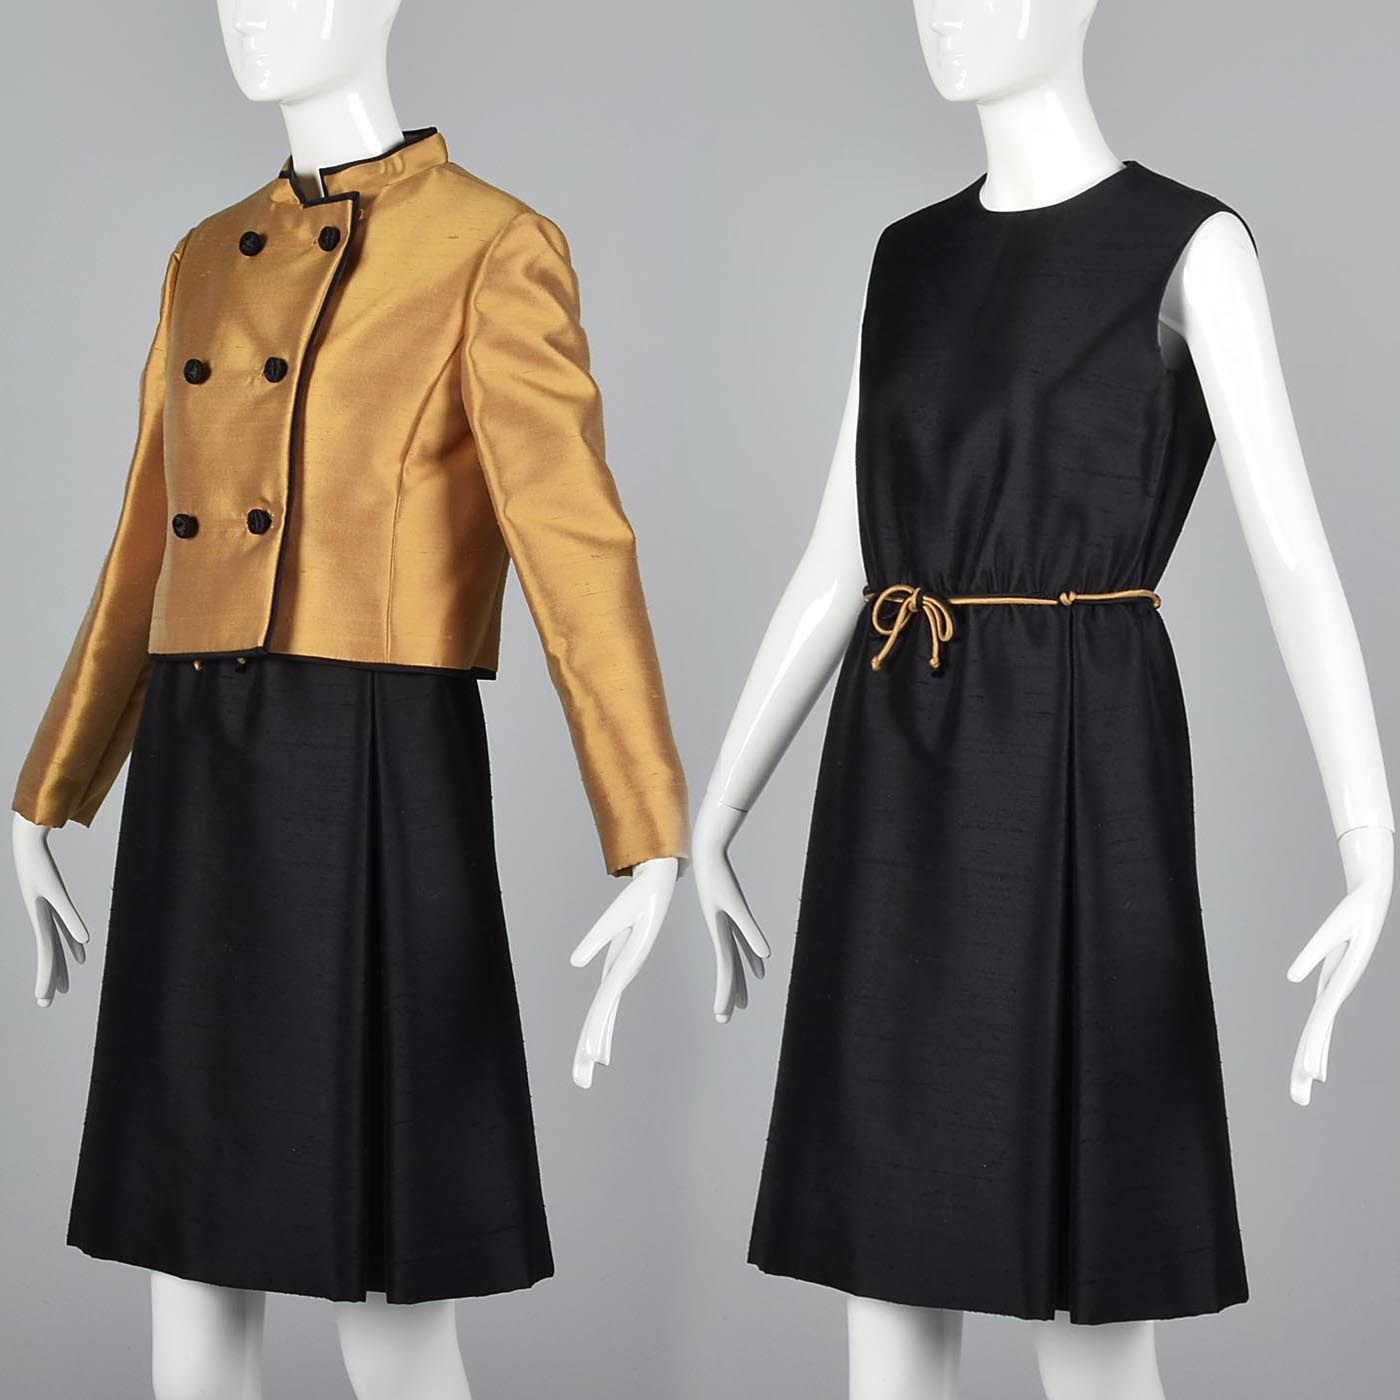 1960s Black Dress with Matching Gold Jacket